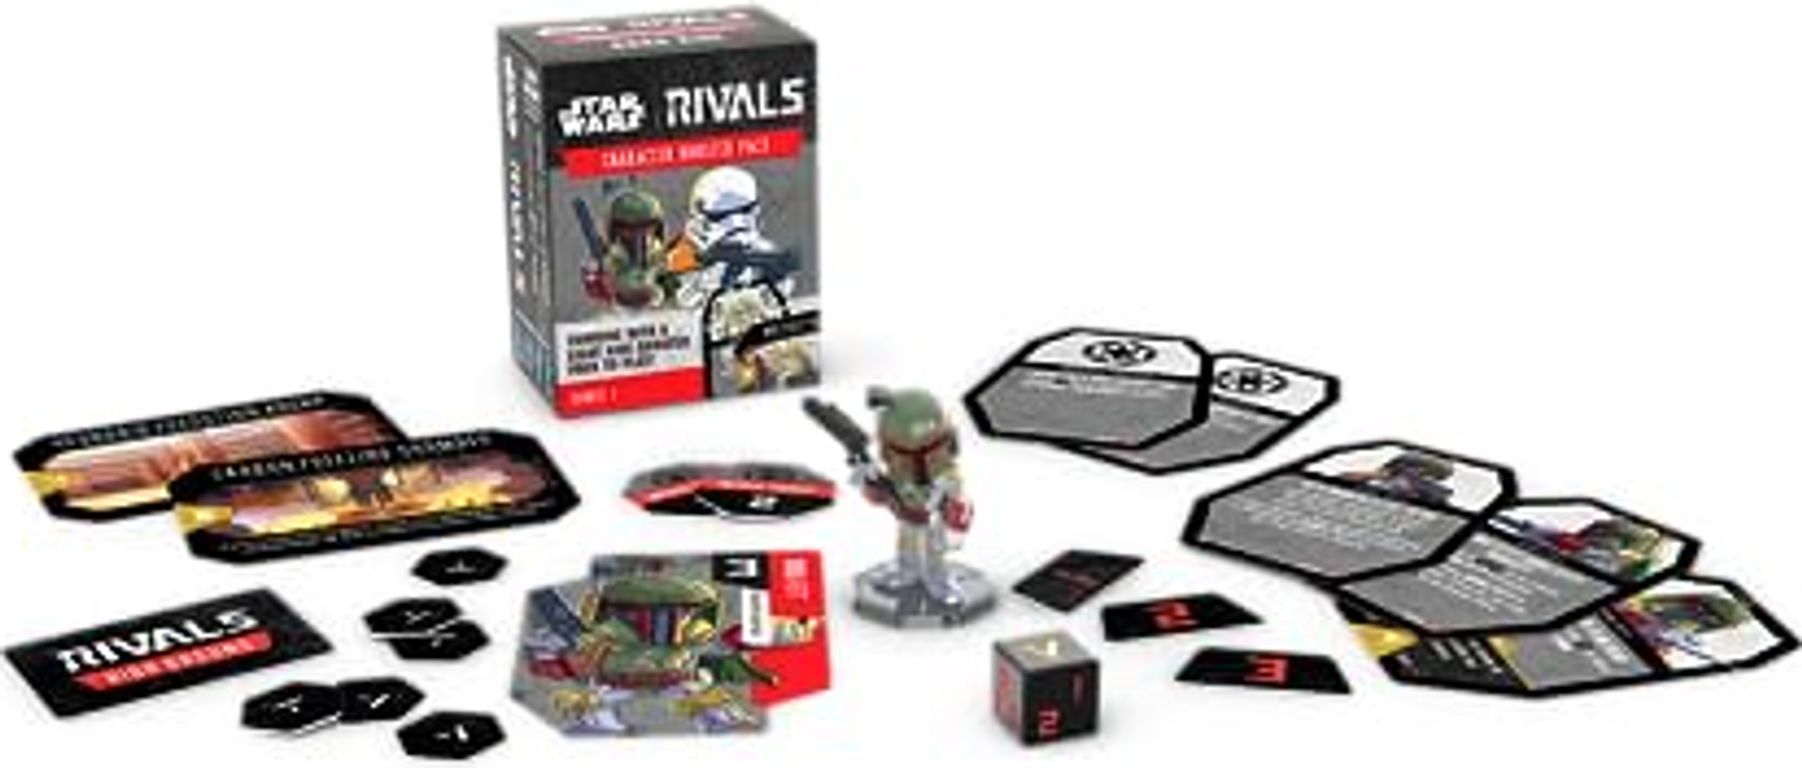 Star Wars Rivals Series 1: Character Booster Pack – Dark Side components